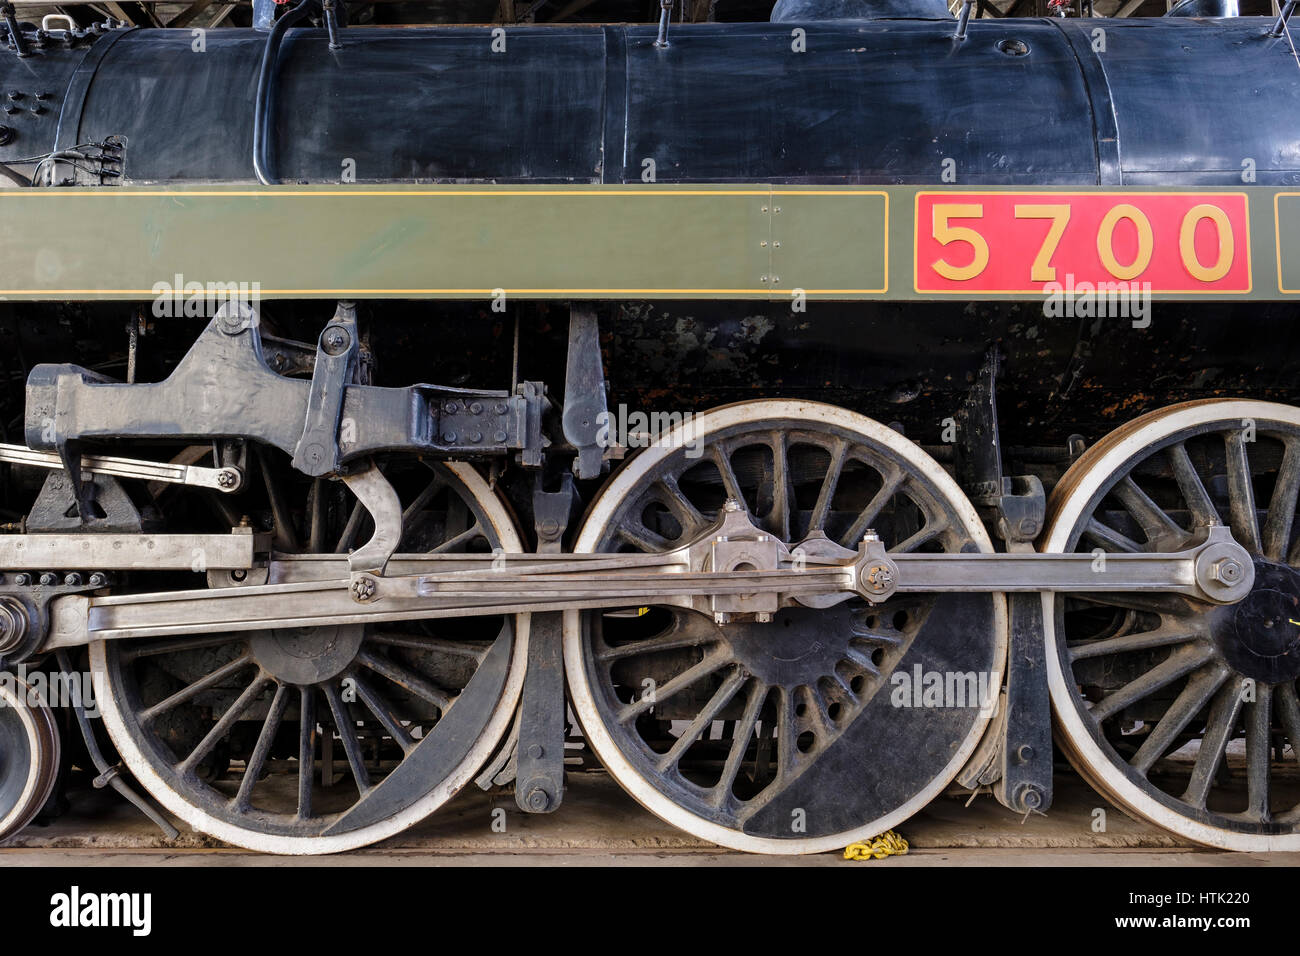 Canadian National Railway K-5-a Hudson, 1930 CN Hudson 5700 steam engine / locomotive wheels at the Elgin County Railway Museum in St. Thomas, Ontario Stock Photo